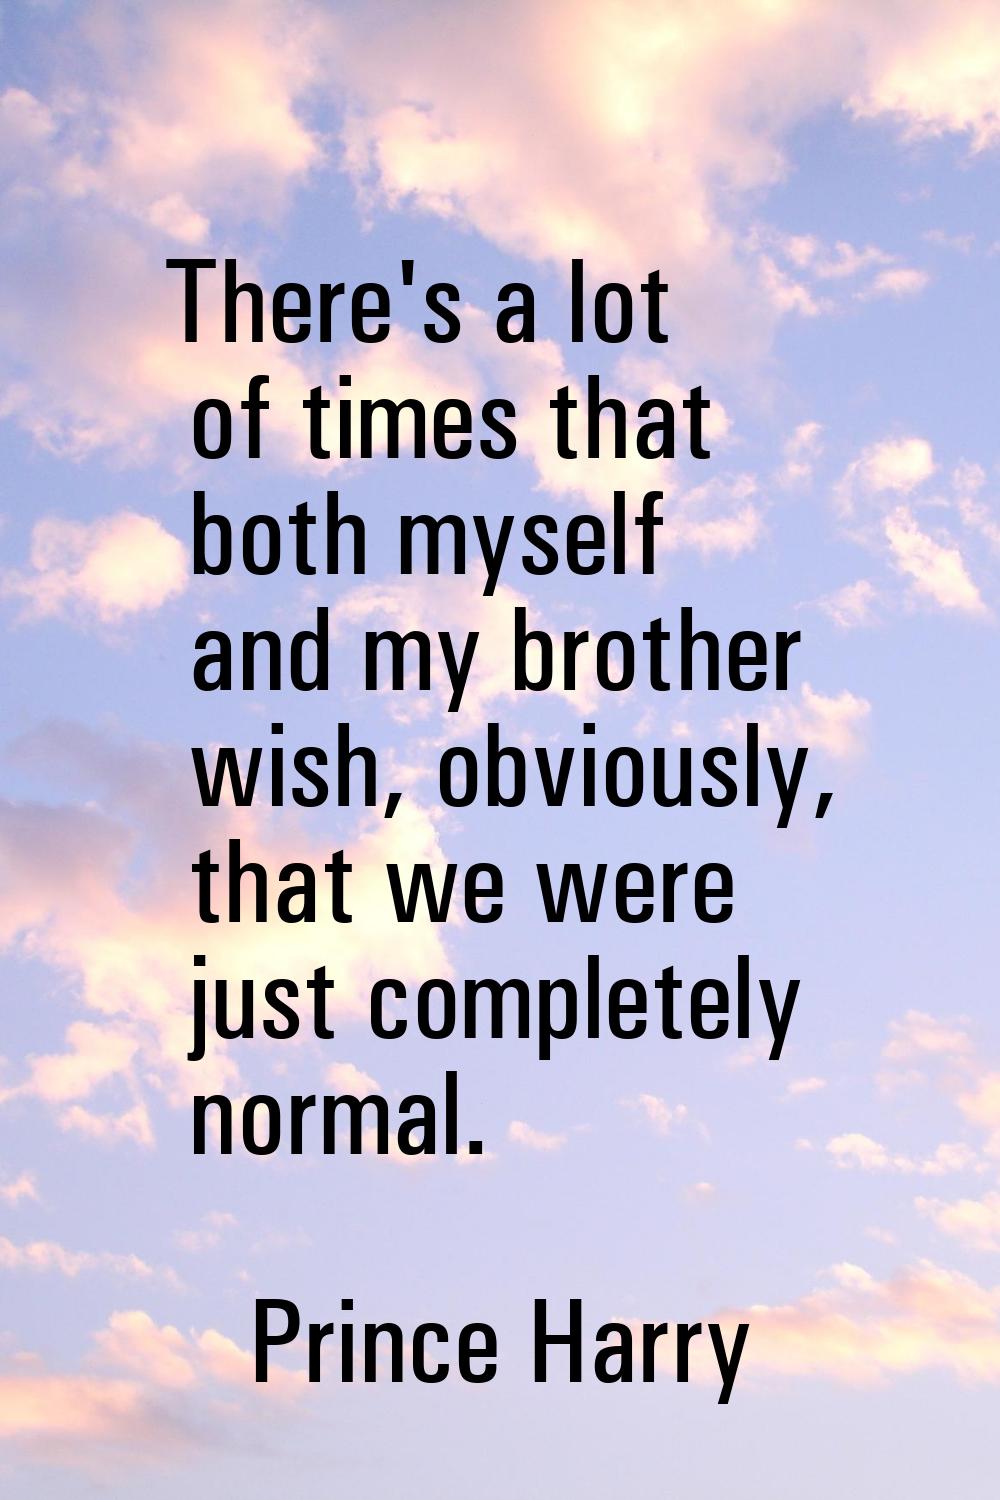 There's a lot of times that both myself and my brother wish, obviously, that we were just completel